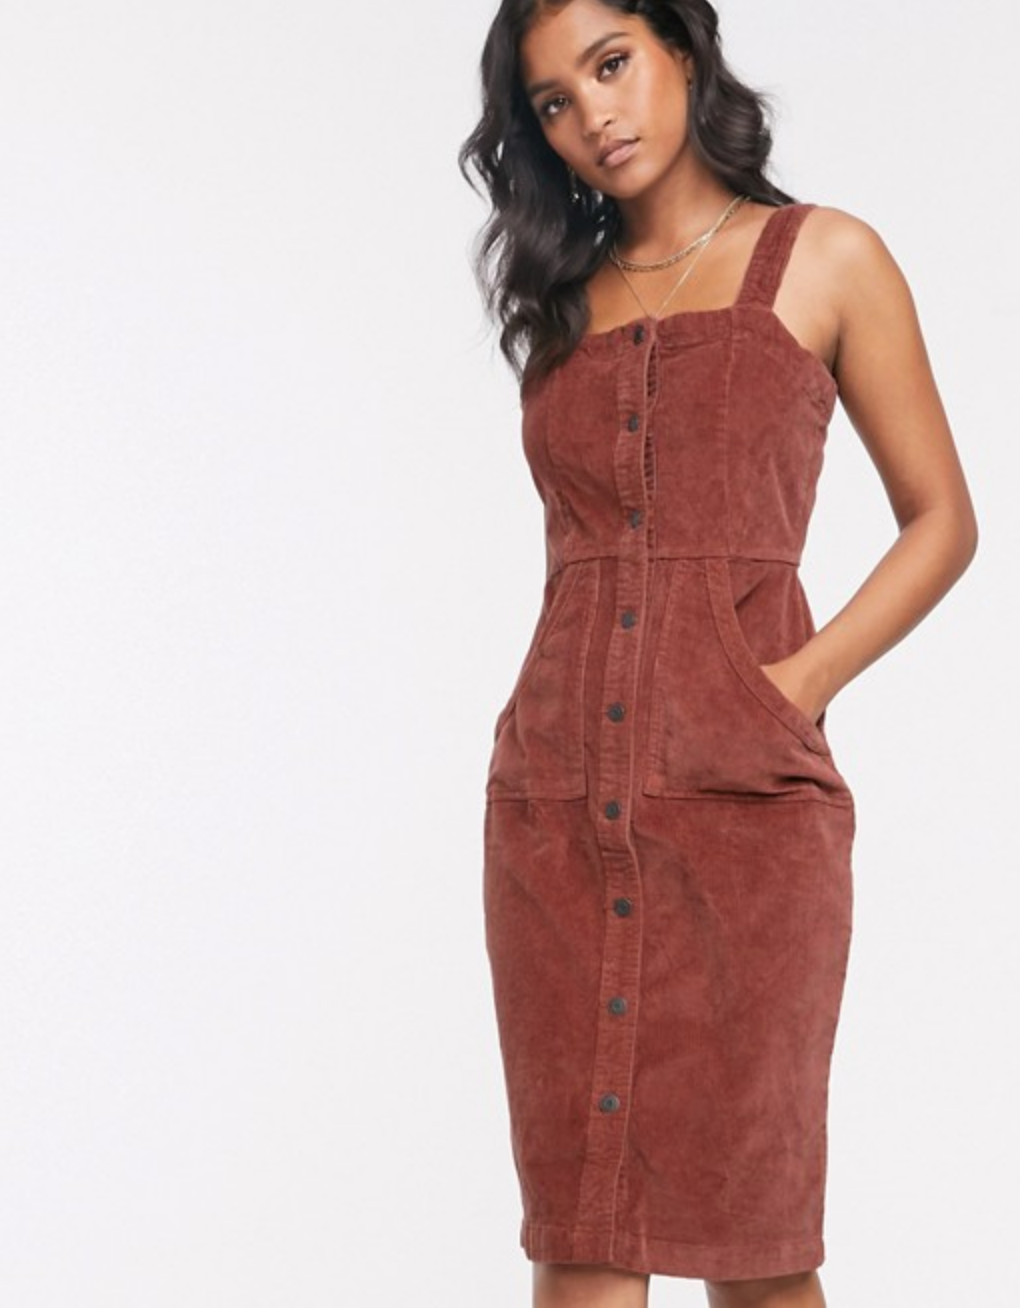 12 Thanksgiving Outfits Under $65 That’ll Take Your Family’s Living Room By Storm